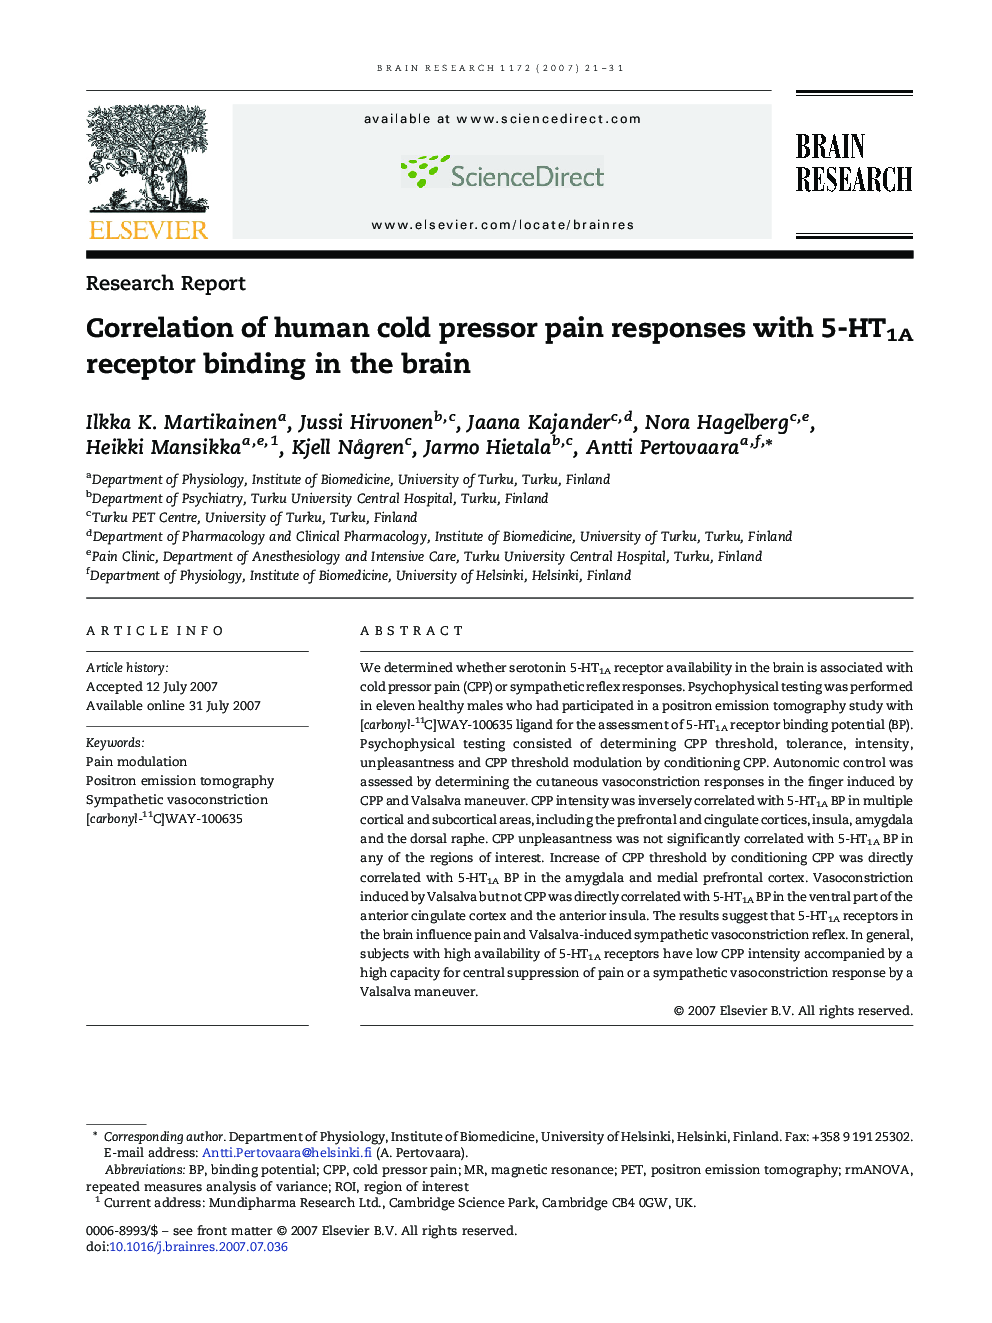 Correlation of human cold pressor pain responses with 5-HT1A receptor binding in the brain